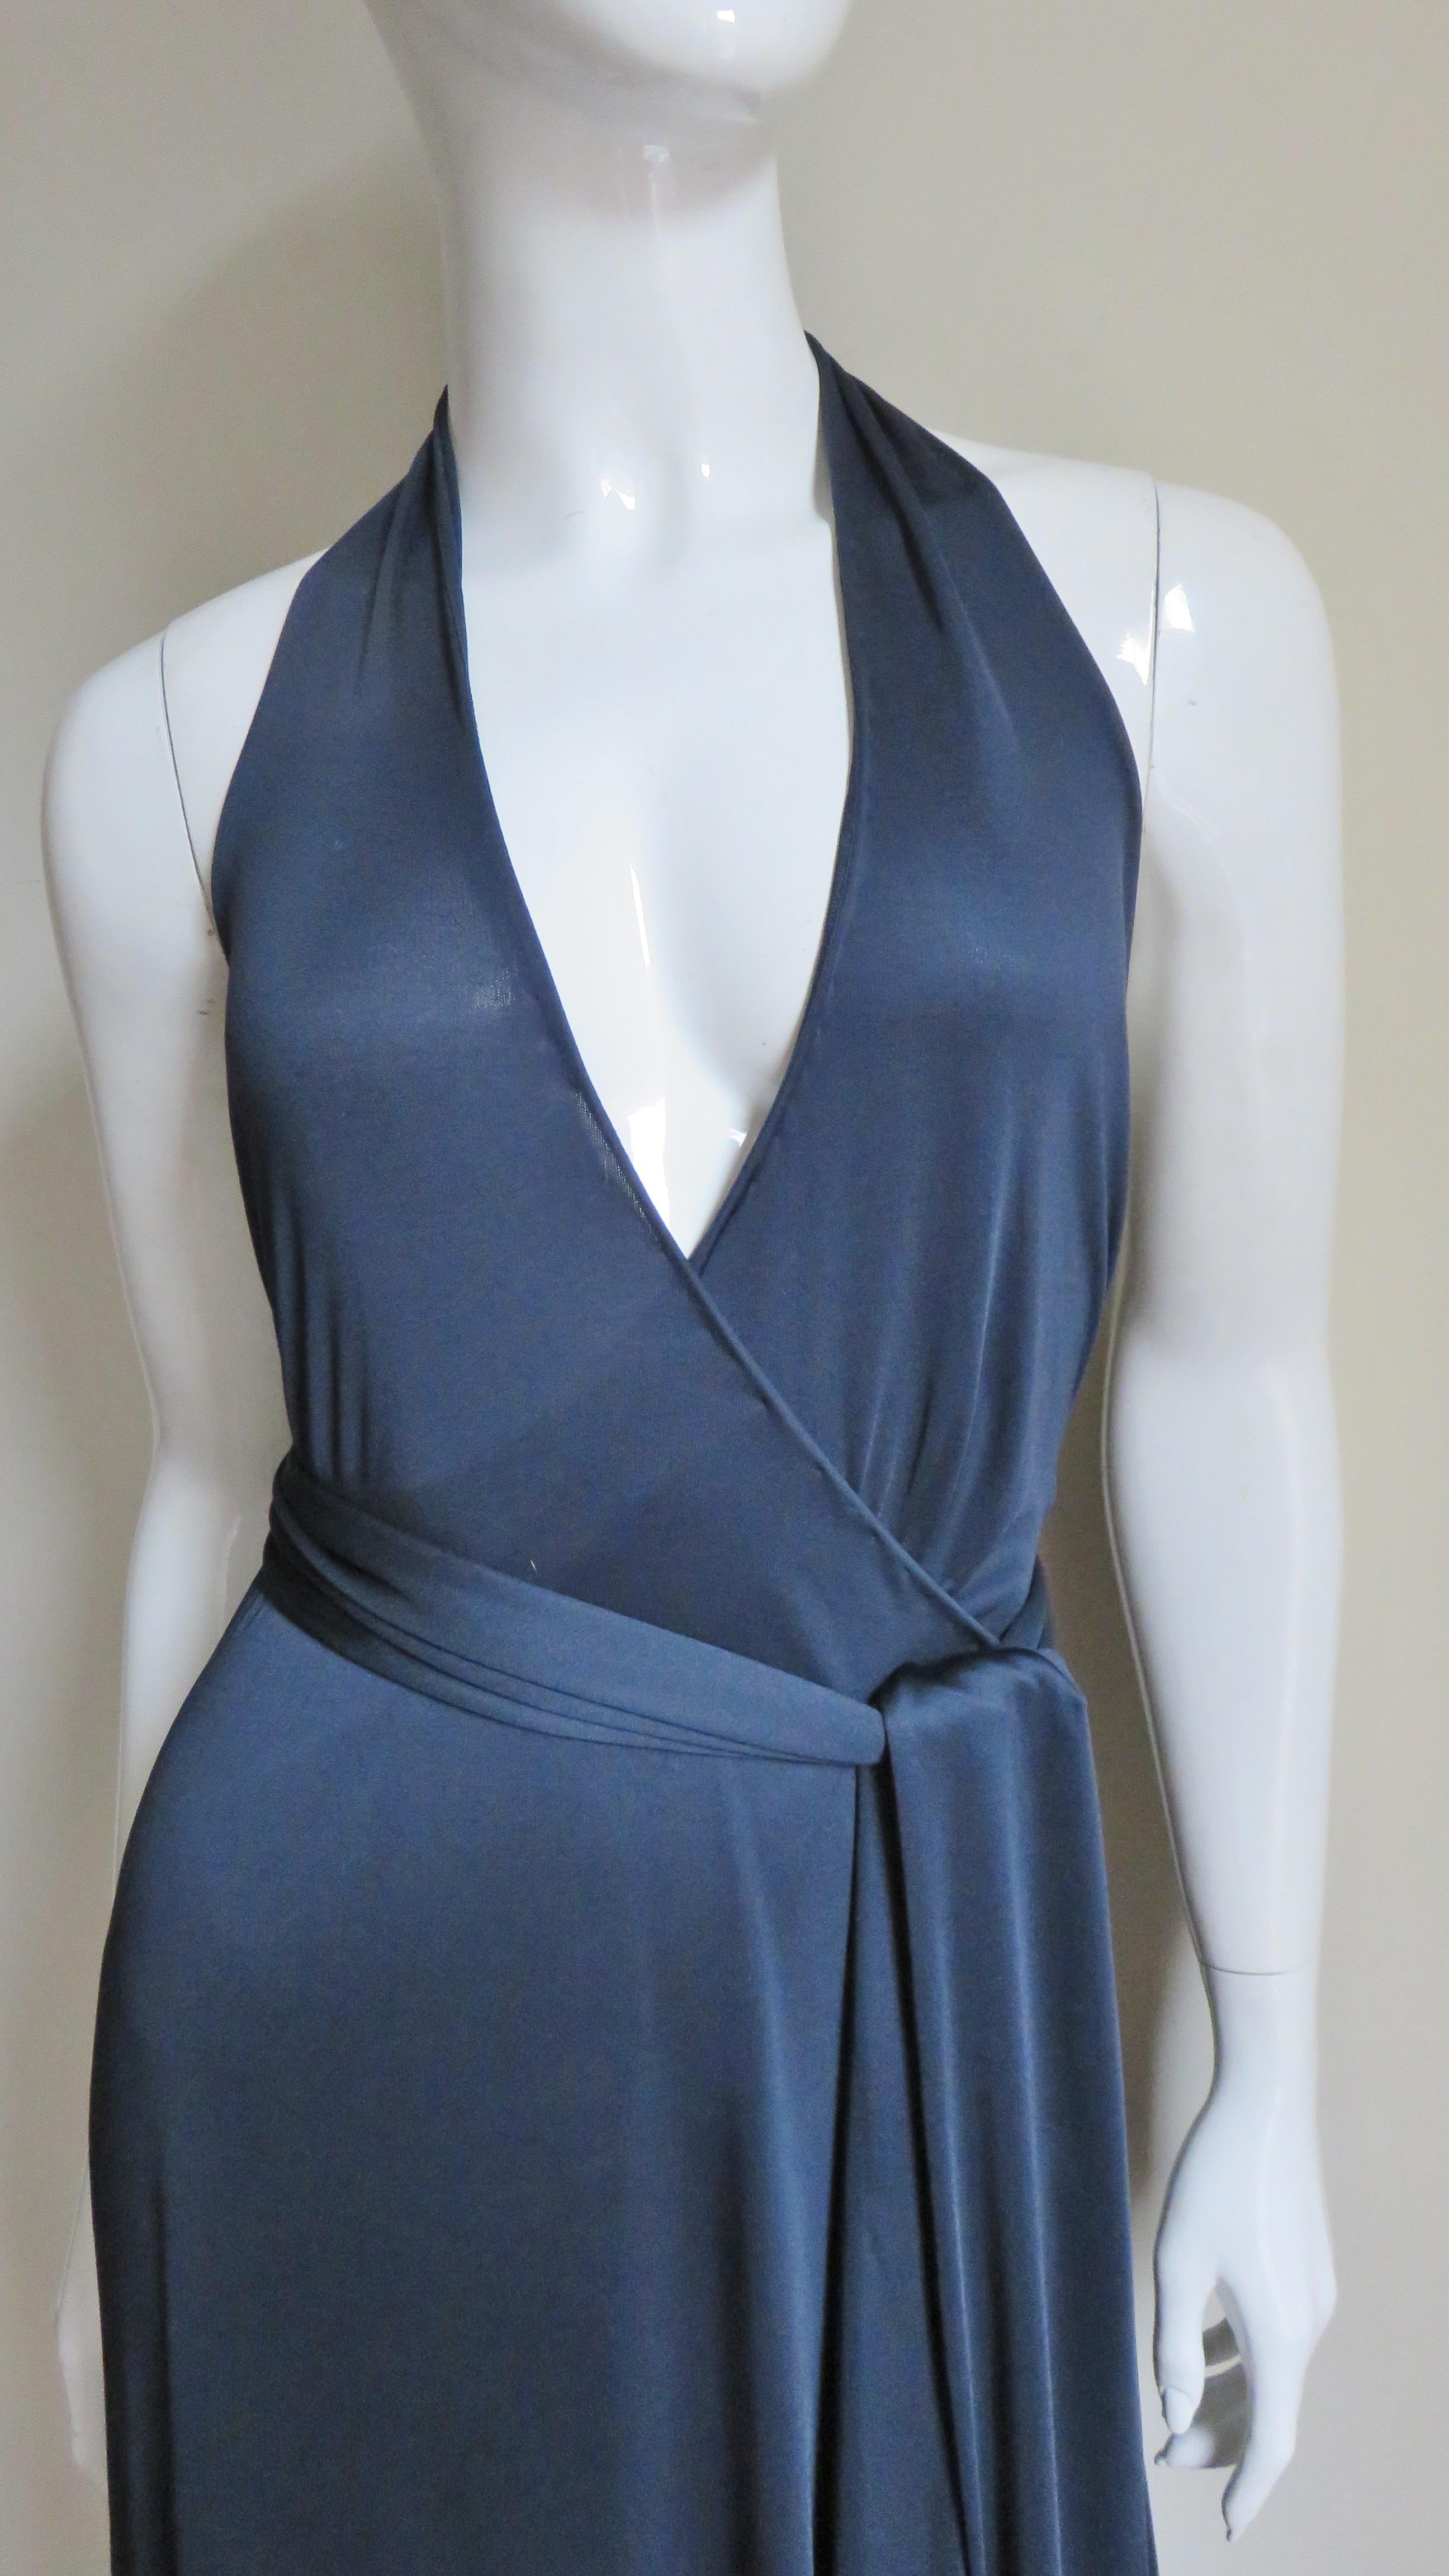 A fabulous wrap dress in a fine navy blue silk jersey from Tom Ford for Gucci. It has a halter neck wrapping and buttoning at the waist and comes with a matching long tie belt.  The skirt has a side slit and a small train in the back. The dress has